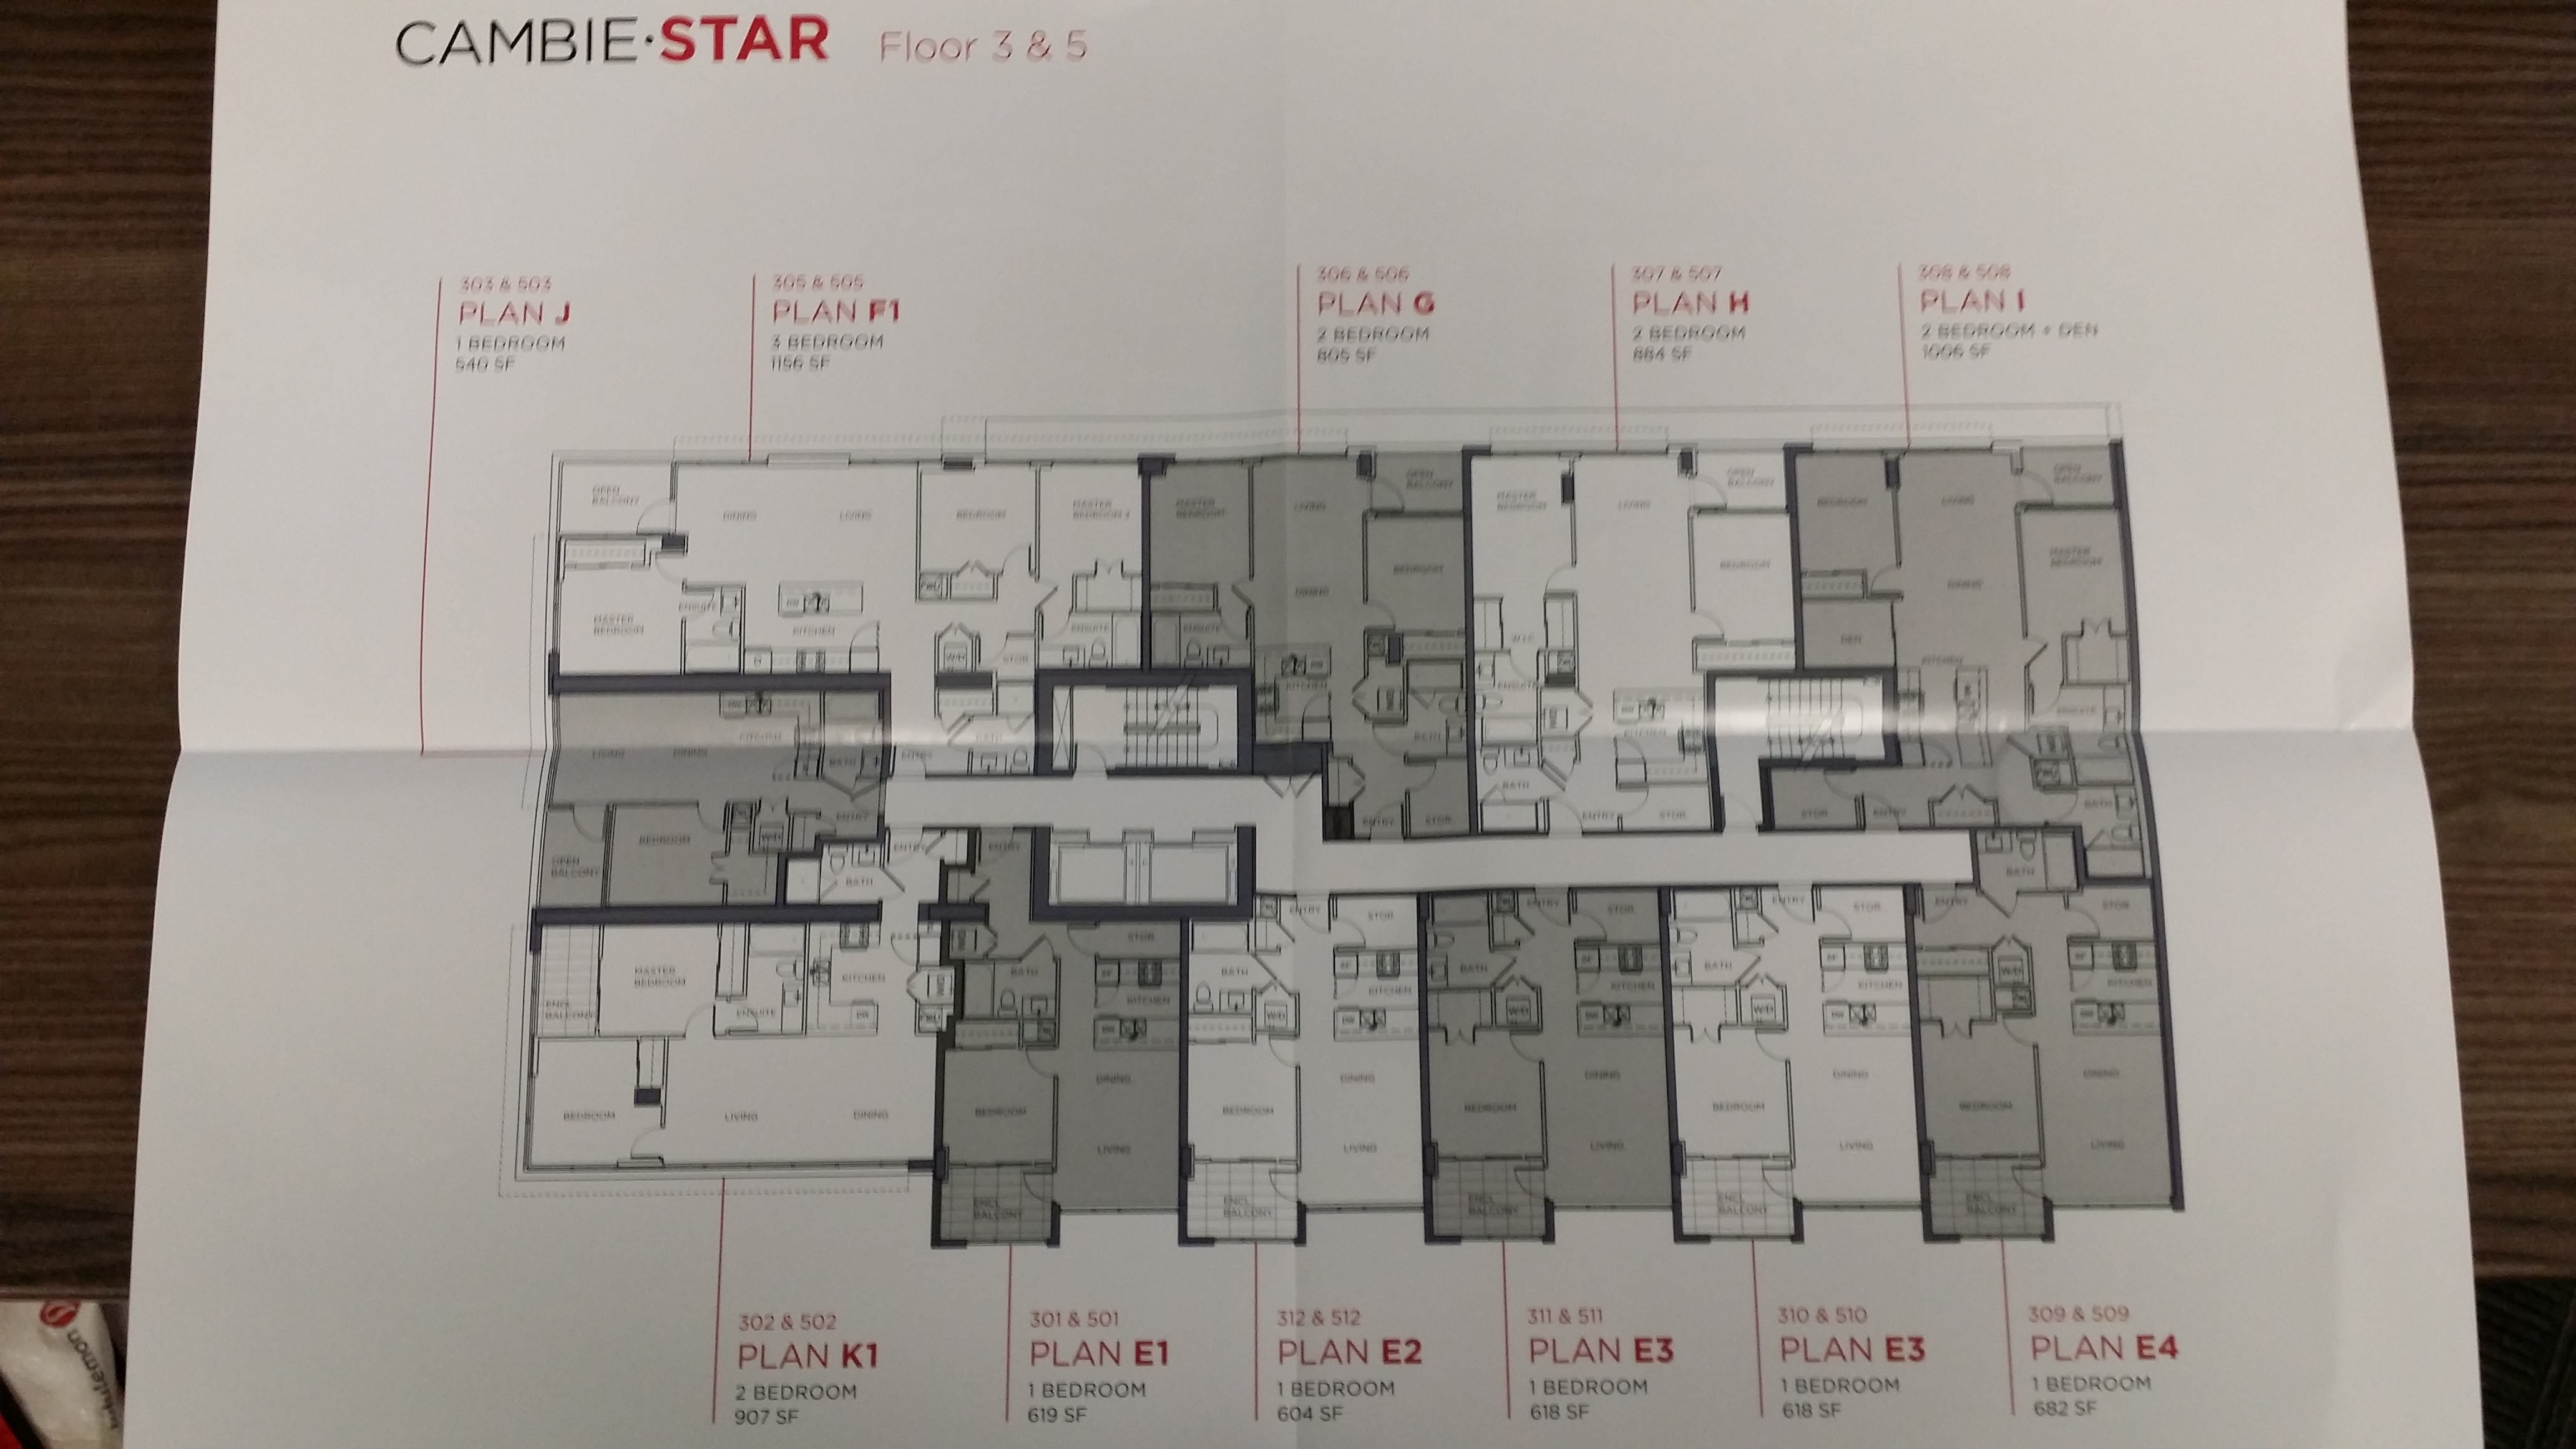 Cambie Star 3rd & 5th Floor Plans